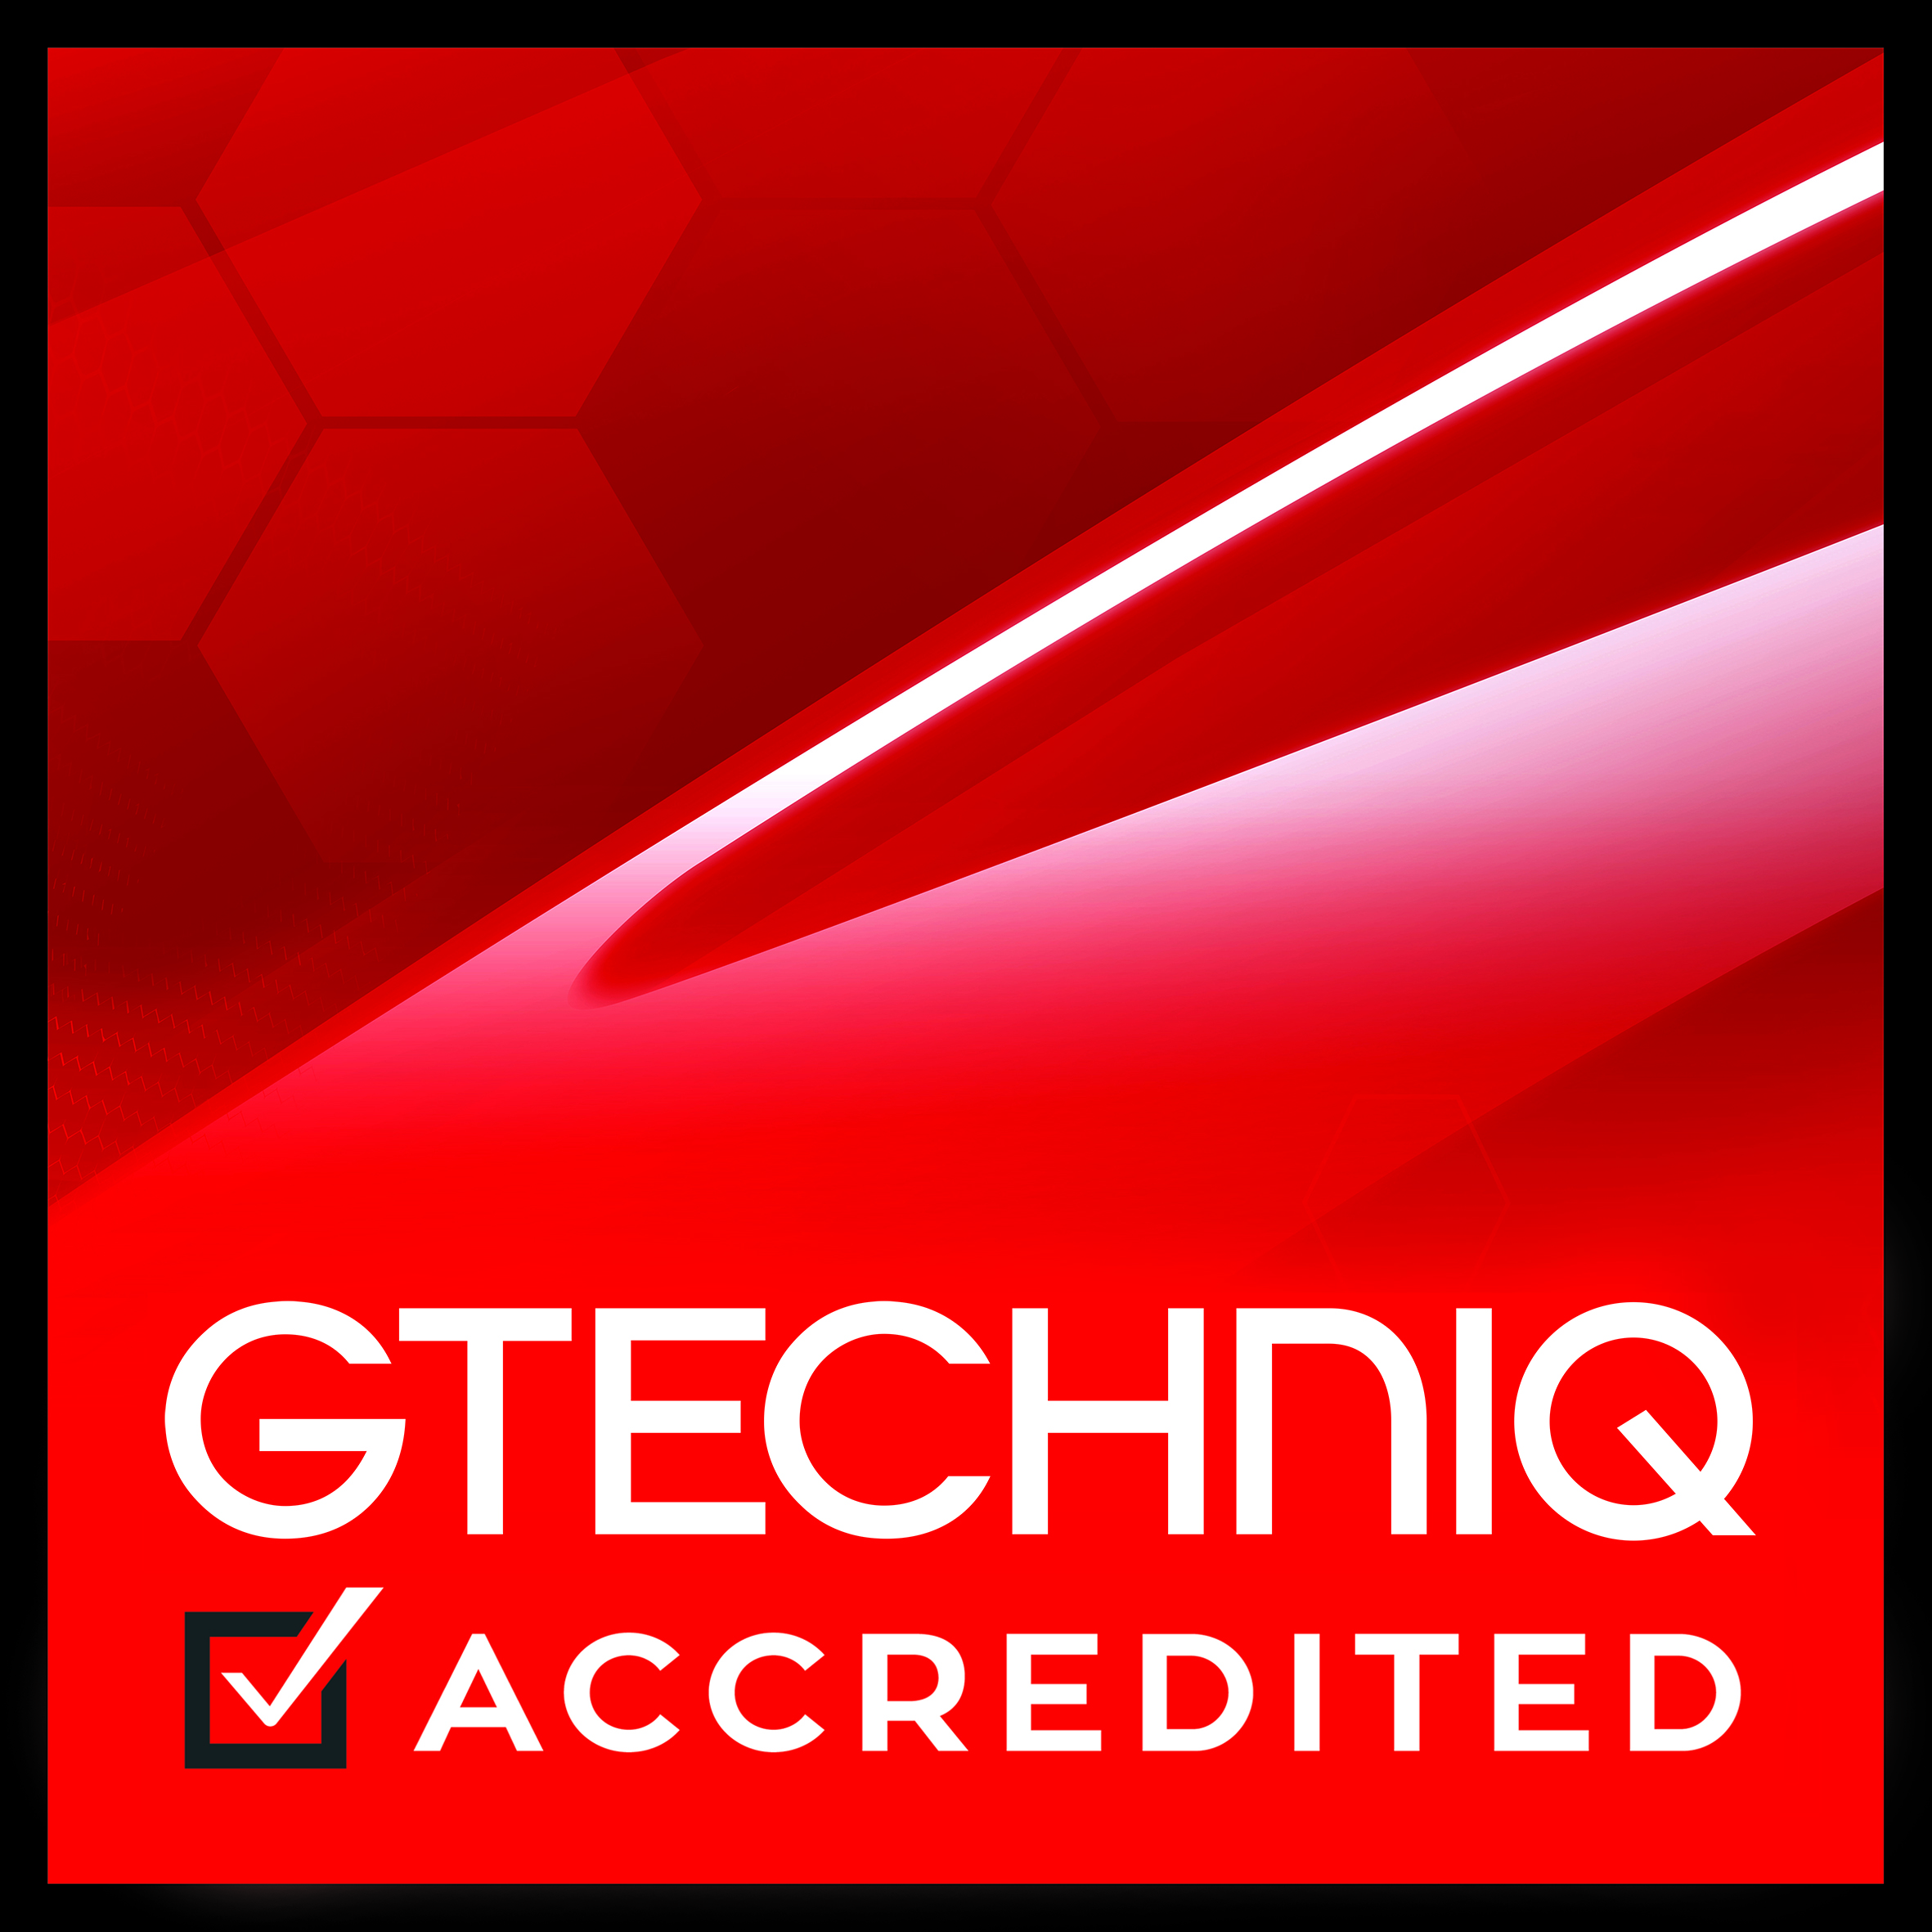 Gtechniq accredited mobile detailing sydney